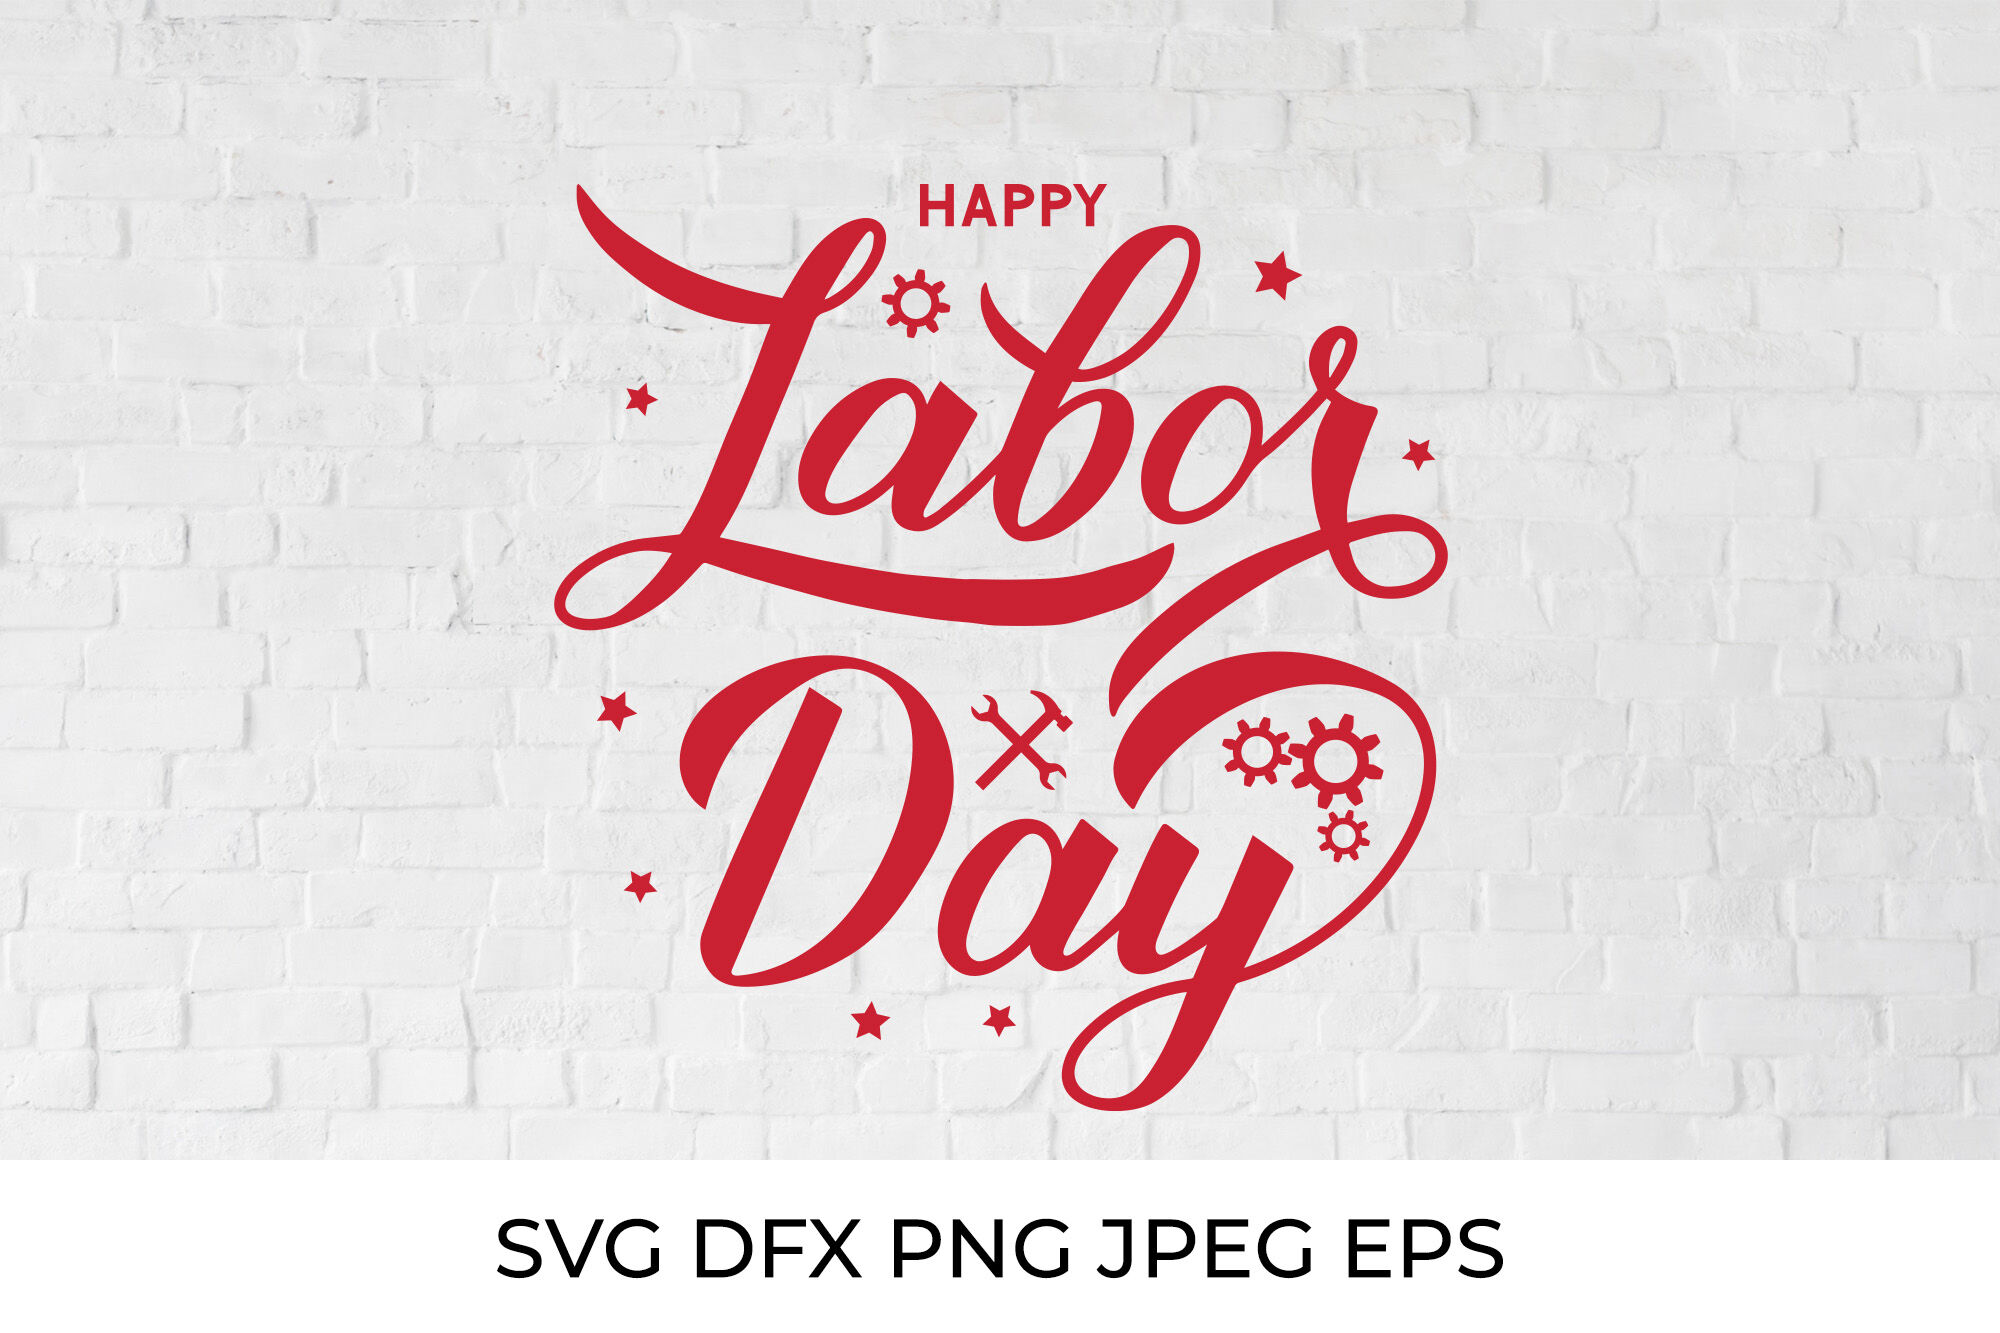 Happy Labor Day calligraphy. Labor day SVG By LaBelezoka | TheHungryJPEG